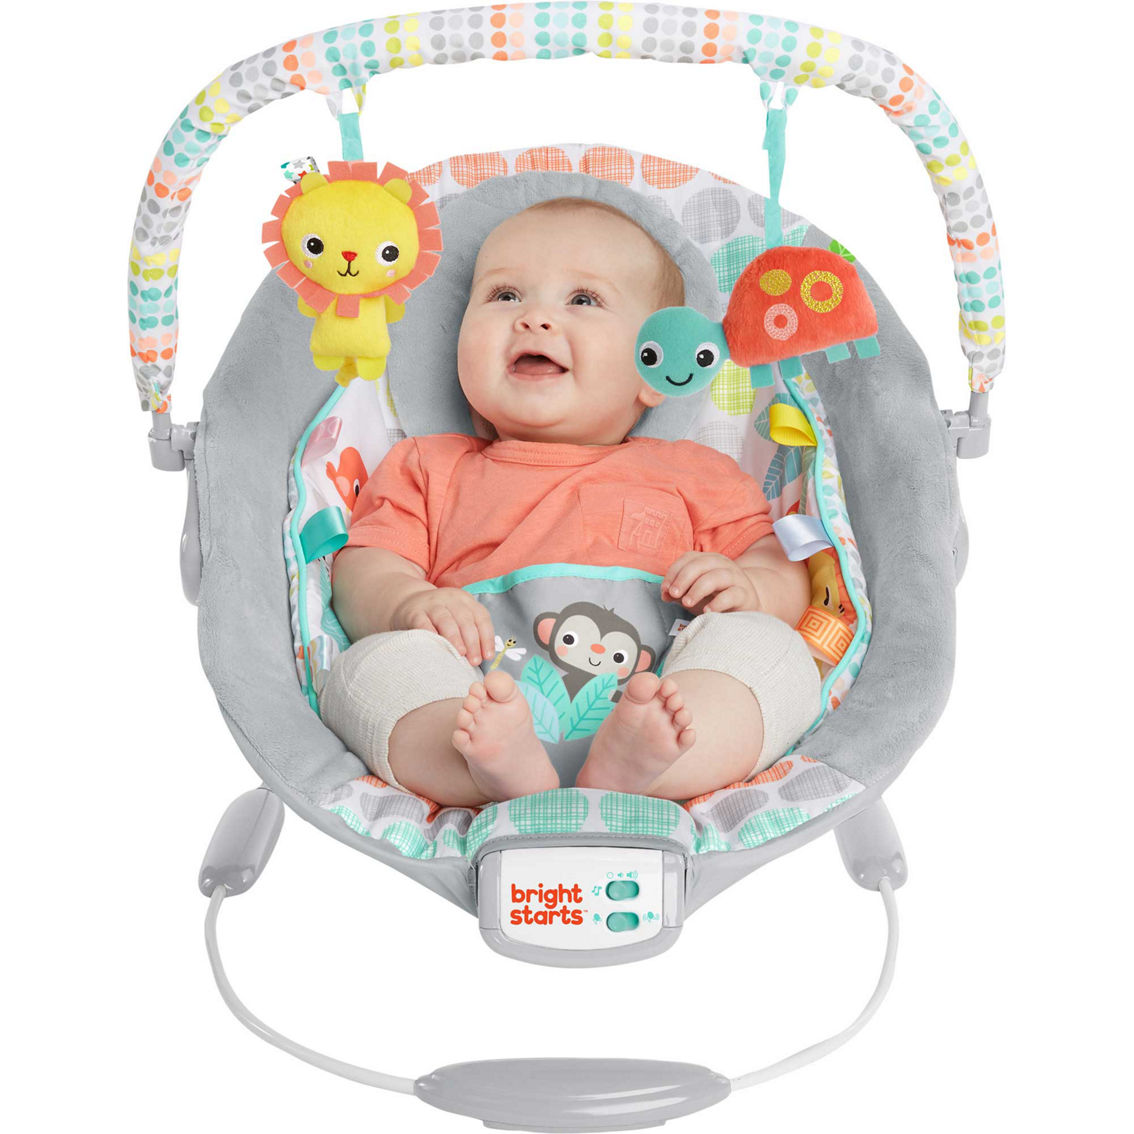 Bright Starts Whimsical Wild Bouncer - Image 2 of 10